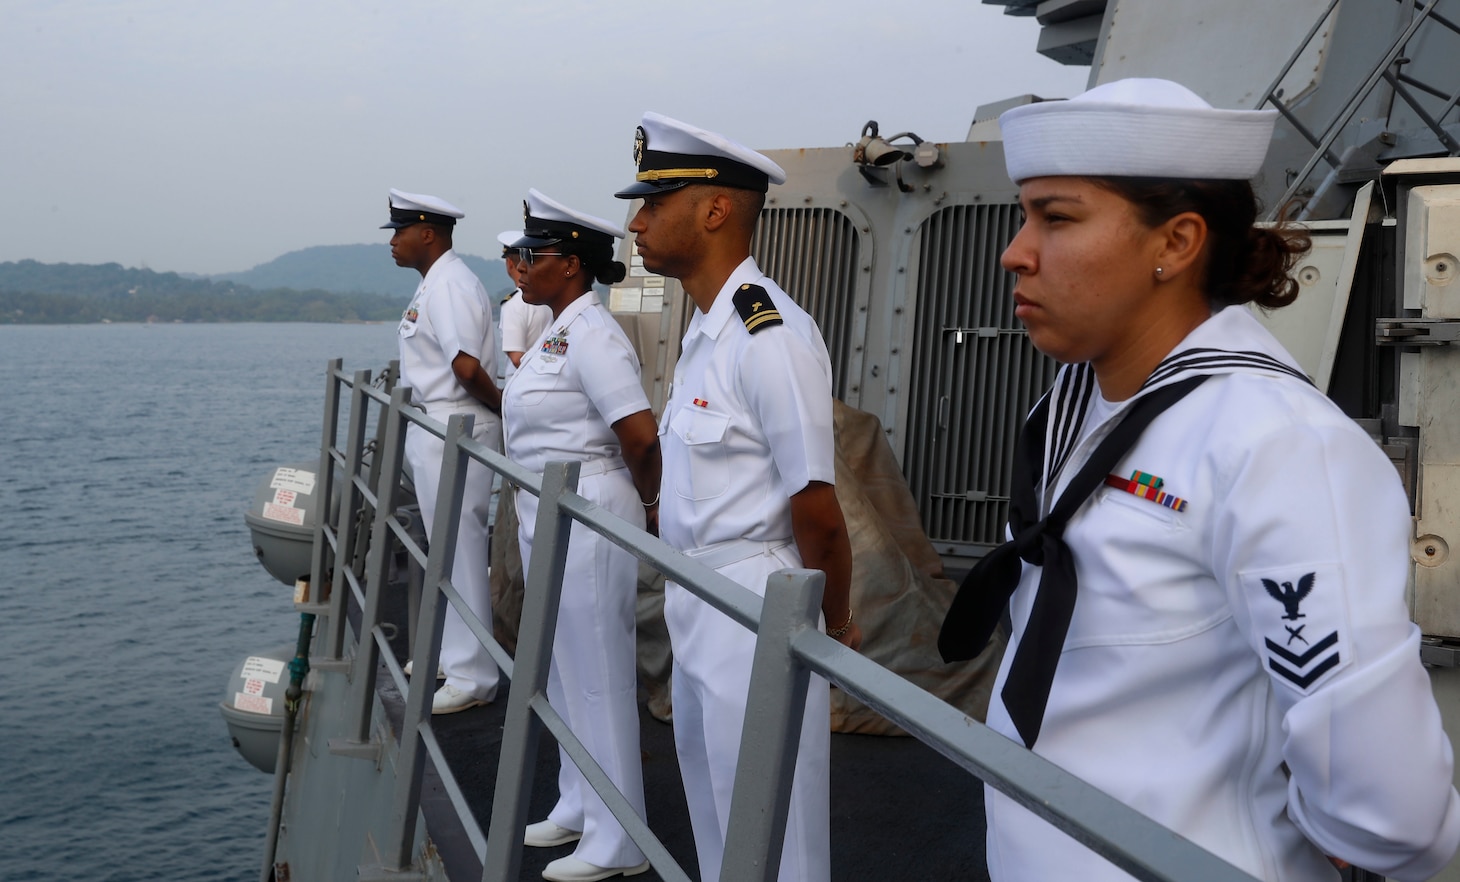 TRINCOMALEE, SRI LANKA (March 13, 2022) Sailors man the rails on the foc’sle of the Arleigh Burke-class guided-missile destroyer USS Fitzgerald (DDG 62) while the Sri Lankan Navy band plays on the pier. Fitzgerald is on a scheduled deployment in the U.S. 7th Fleet area of operations to enhance interoperability with alliances and partnerships while serving as a ready-response force in support of a free and open Indo-Pacific region. (U.S. Navy photo by Mass Communication Specialist 3rd Class Catie Coyle)